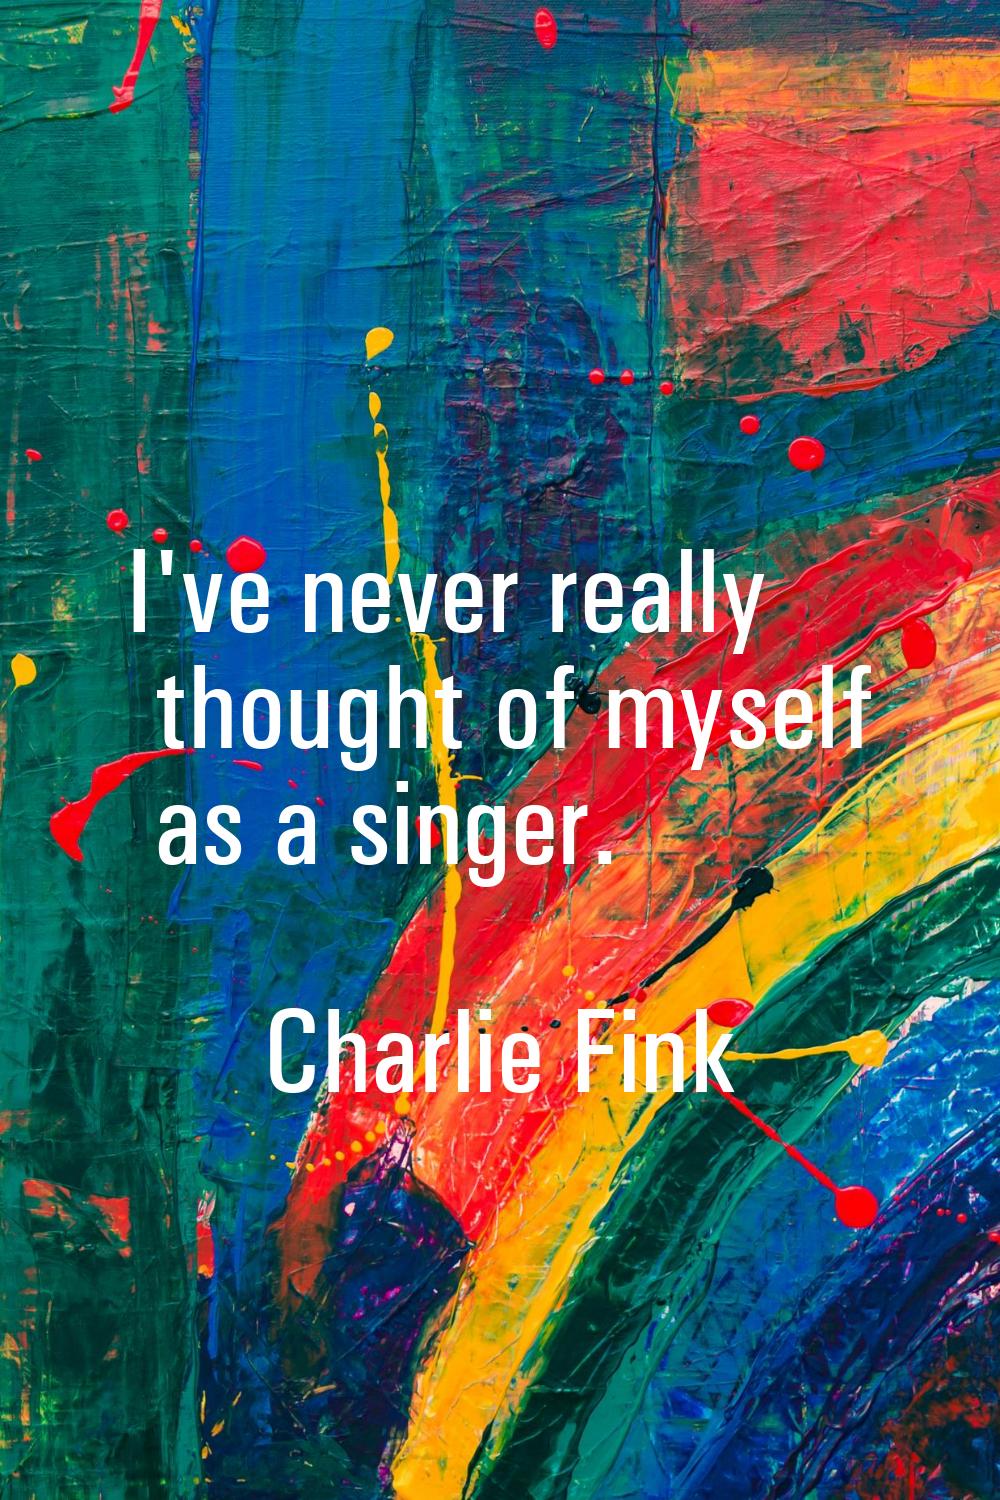 I've never really thought of myself as a singer.